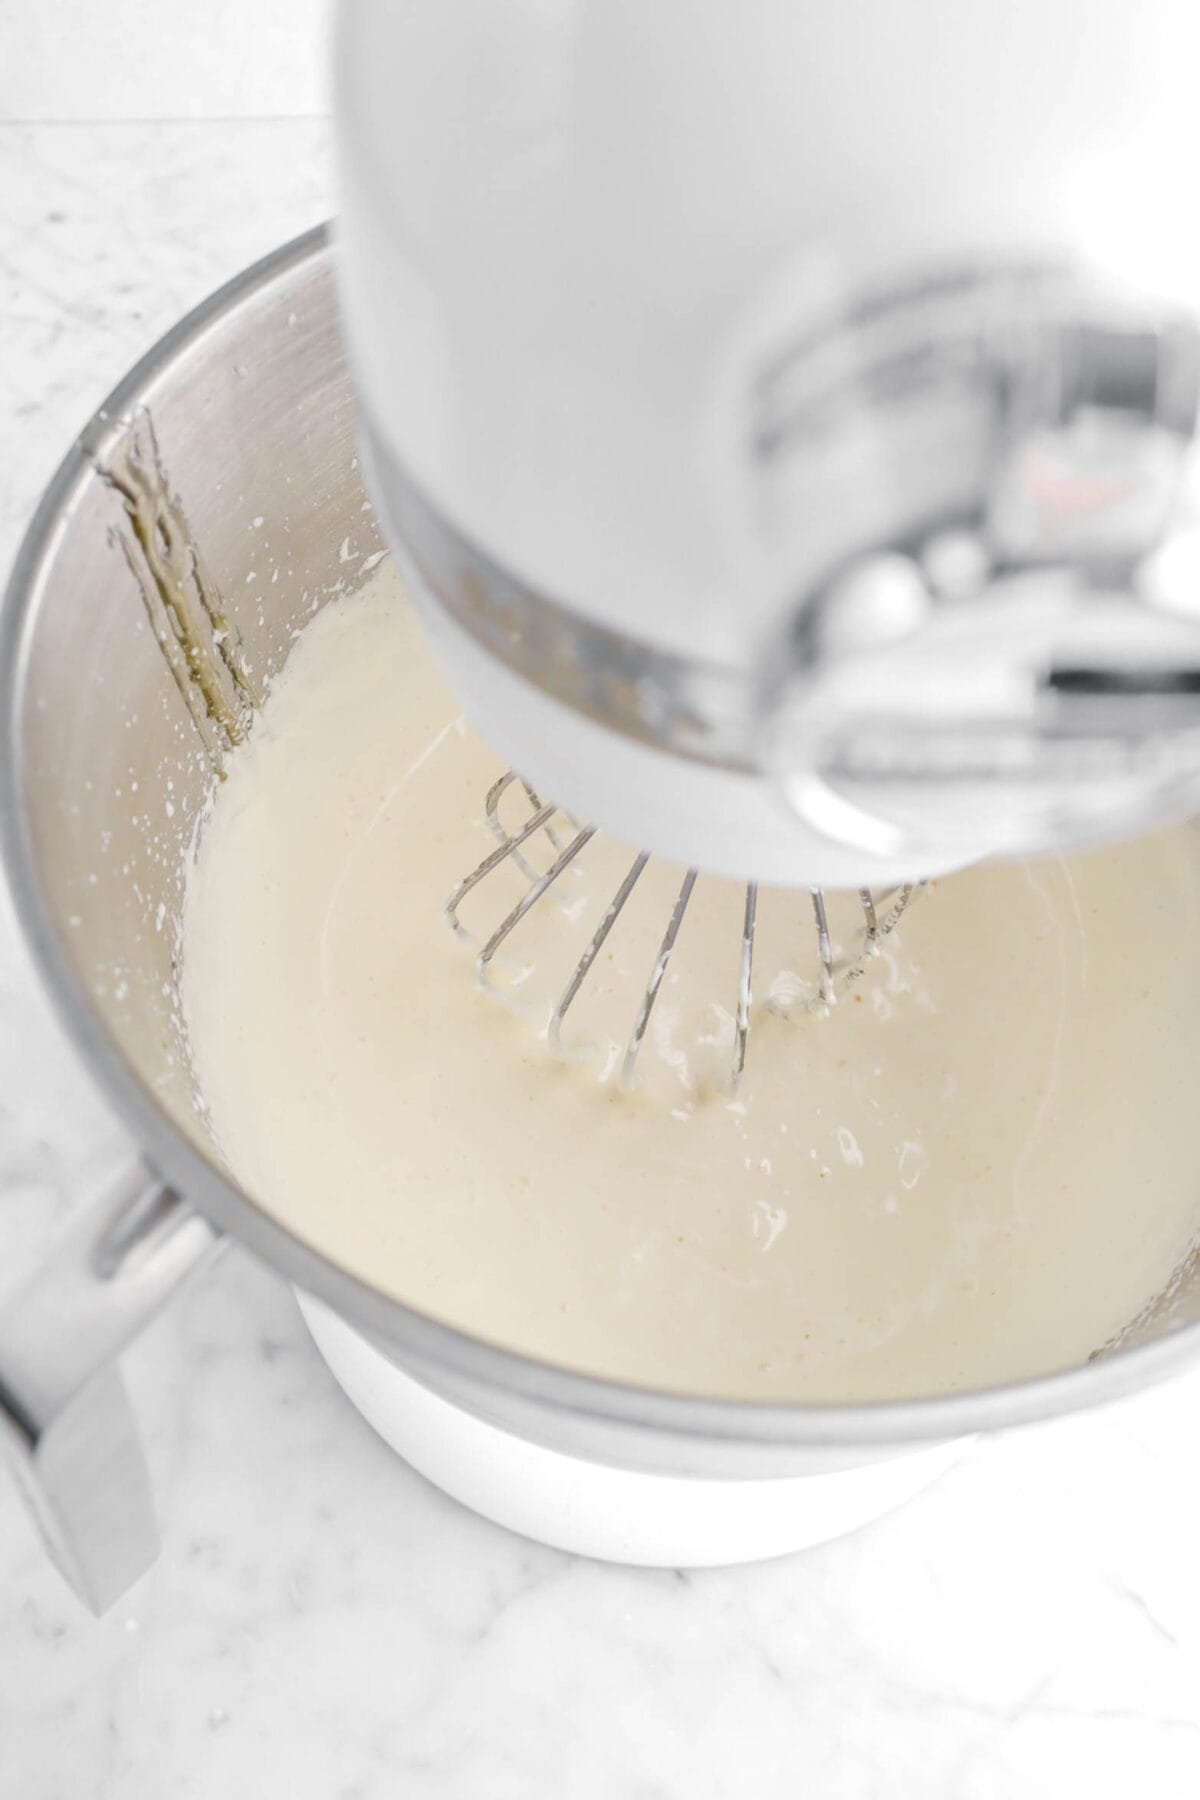 whipped egg mixture in stand mixer